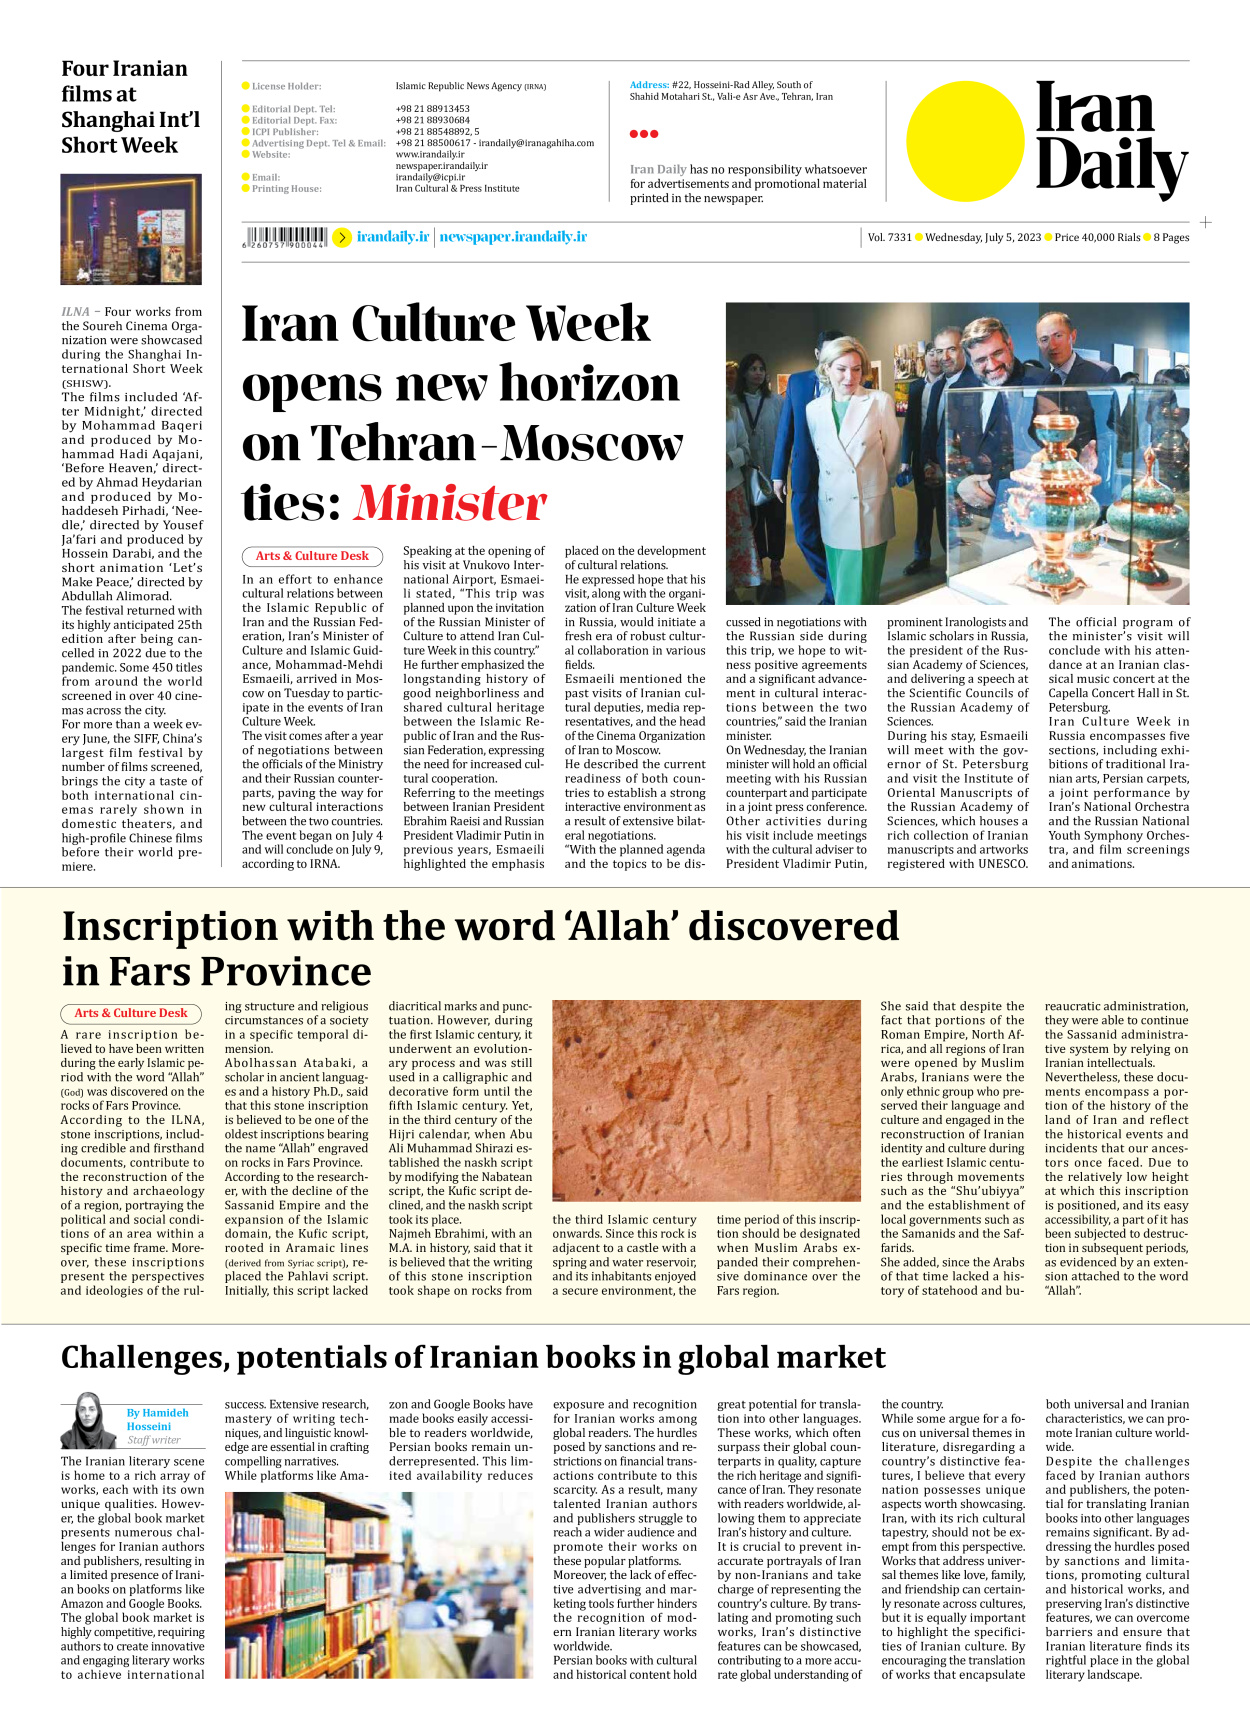 Iran Daily - Number Seven Thousand Three Hundred and Thirty One - 05 July 2023 - Page 8